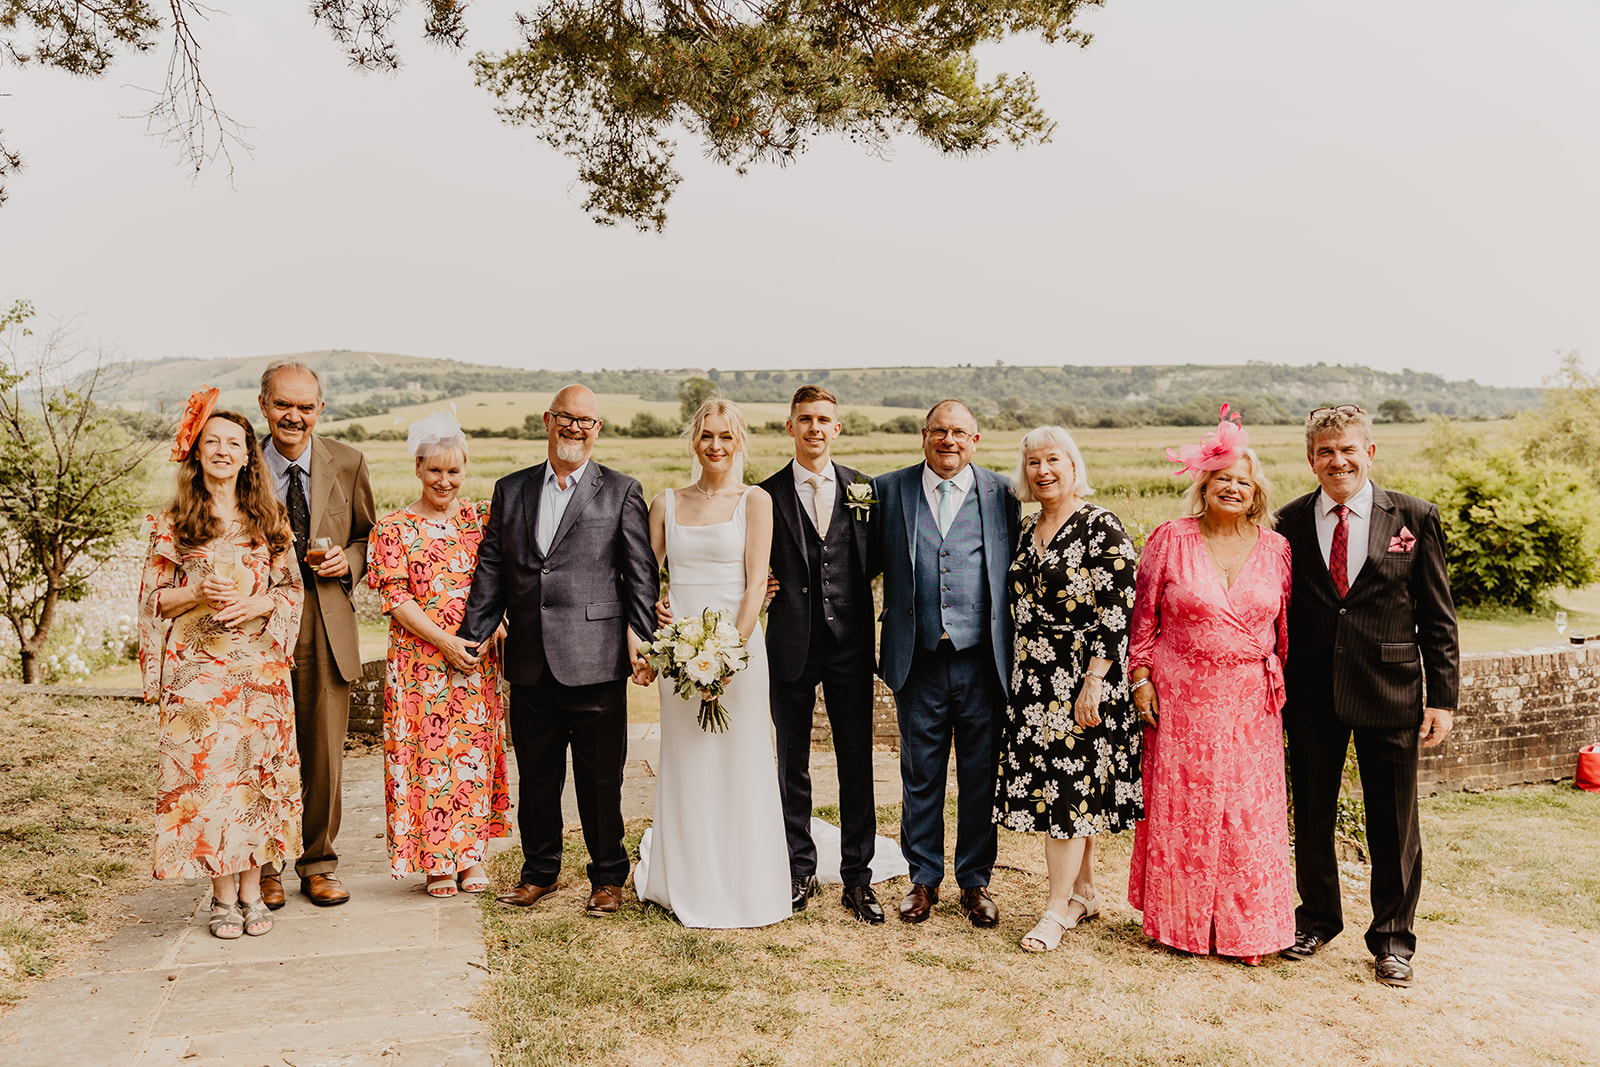 Family photos at a Bury Manor Barn Wedding in Sussex. Photographer OliveJoy Photography.